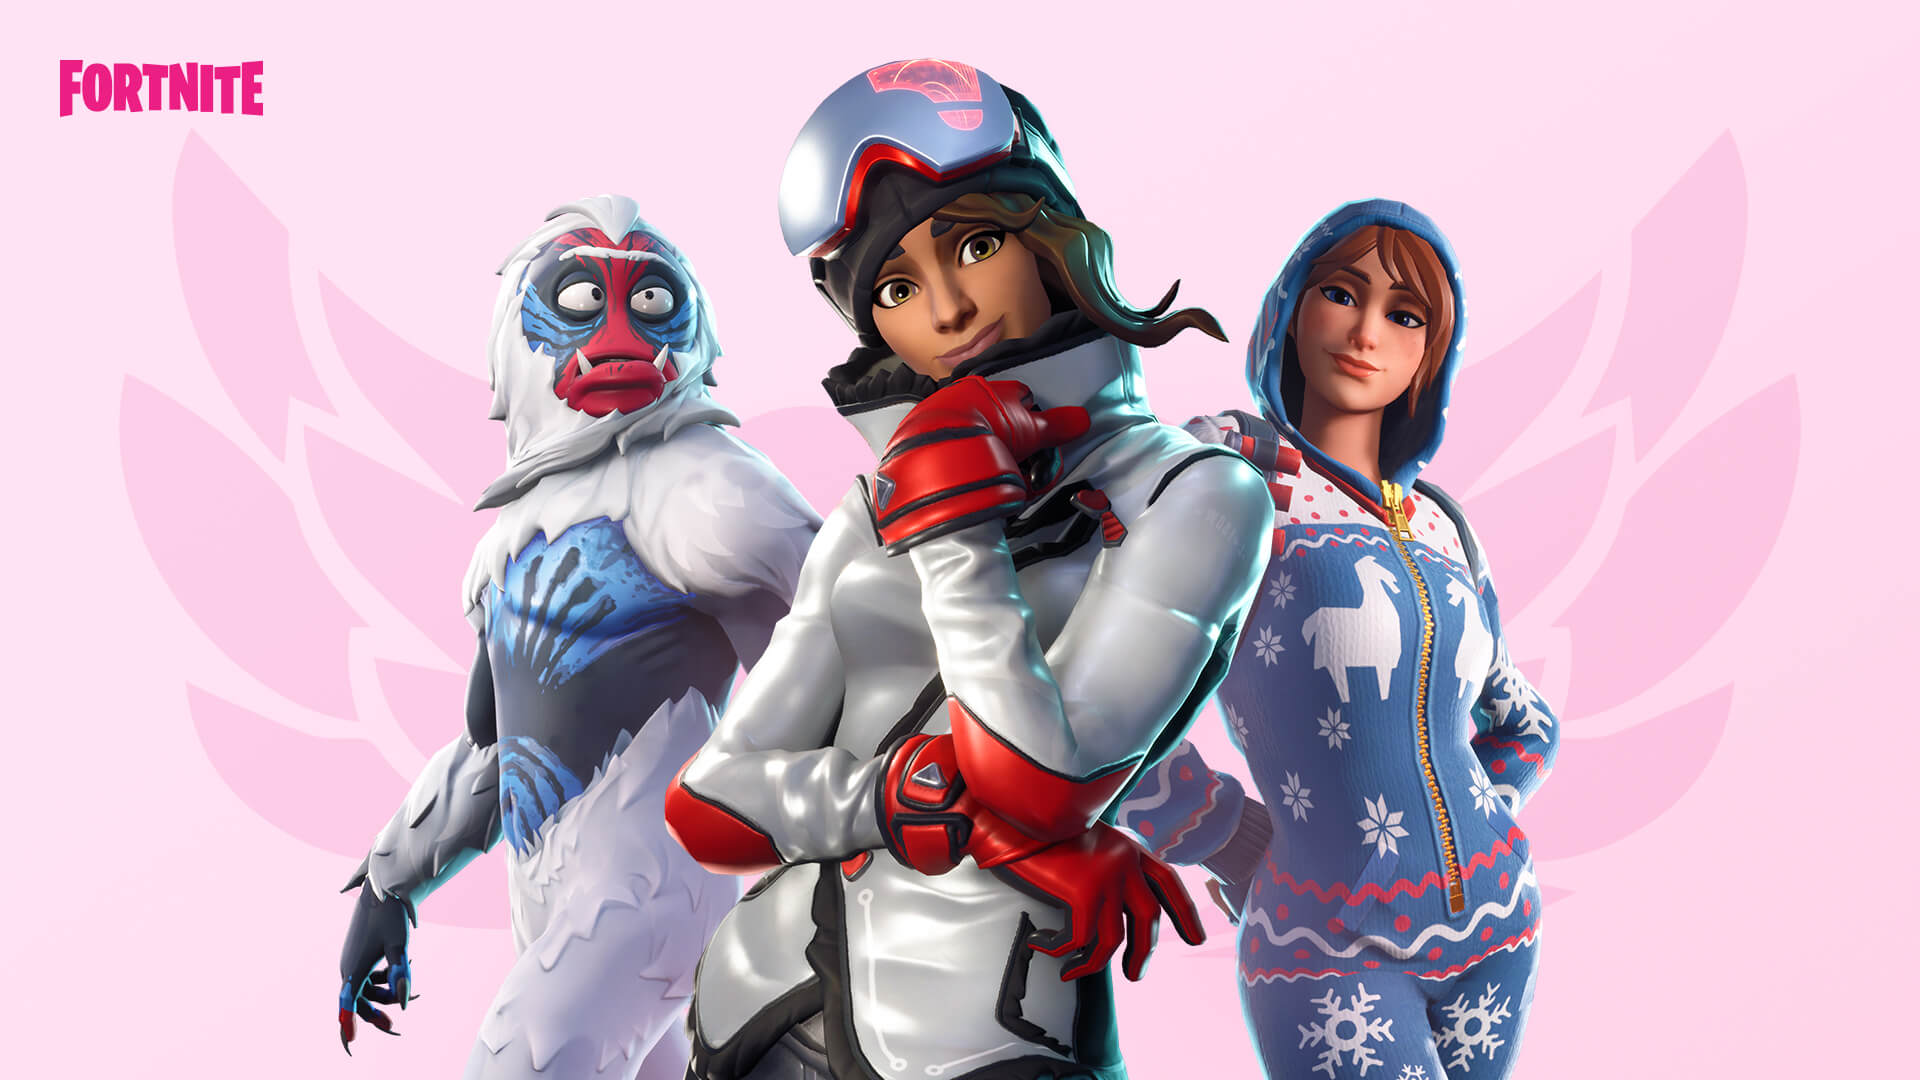 Fortnite.com Updates 7.40 Fortnite Patch 7 40 Is Live With Some Massive Changes